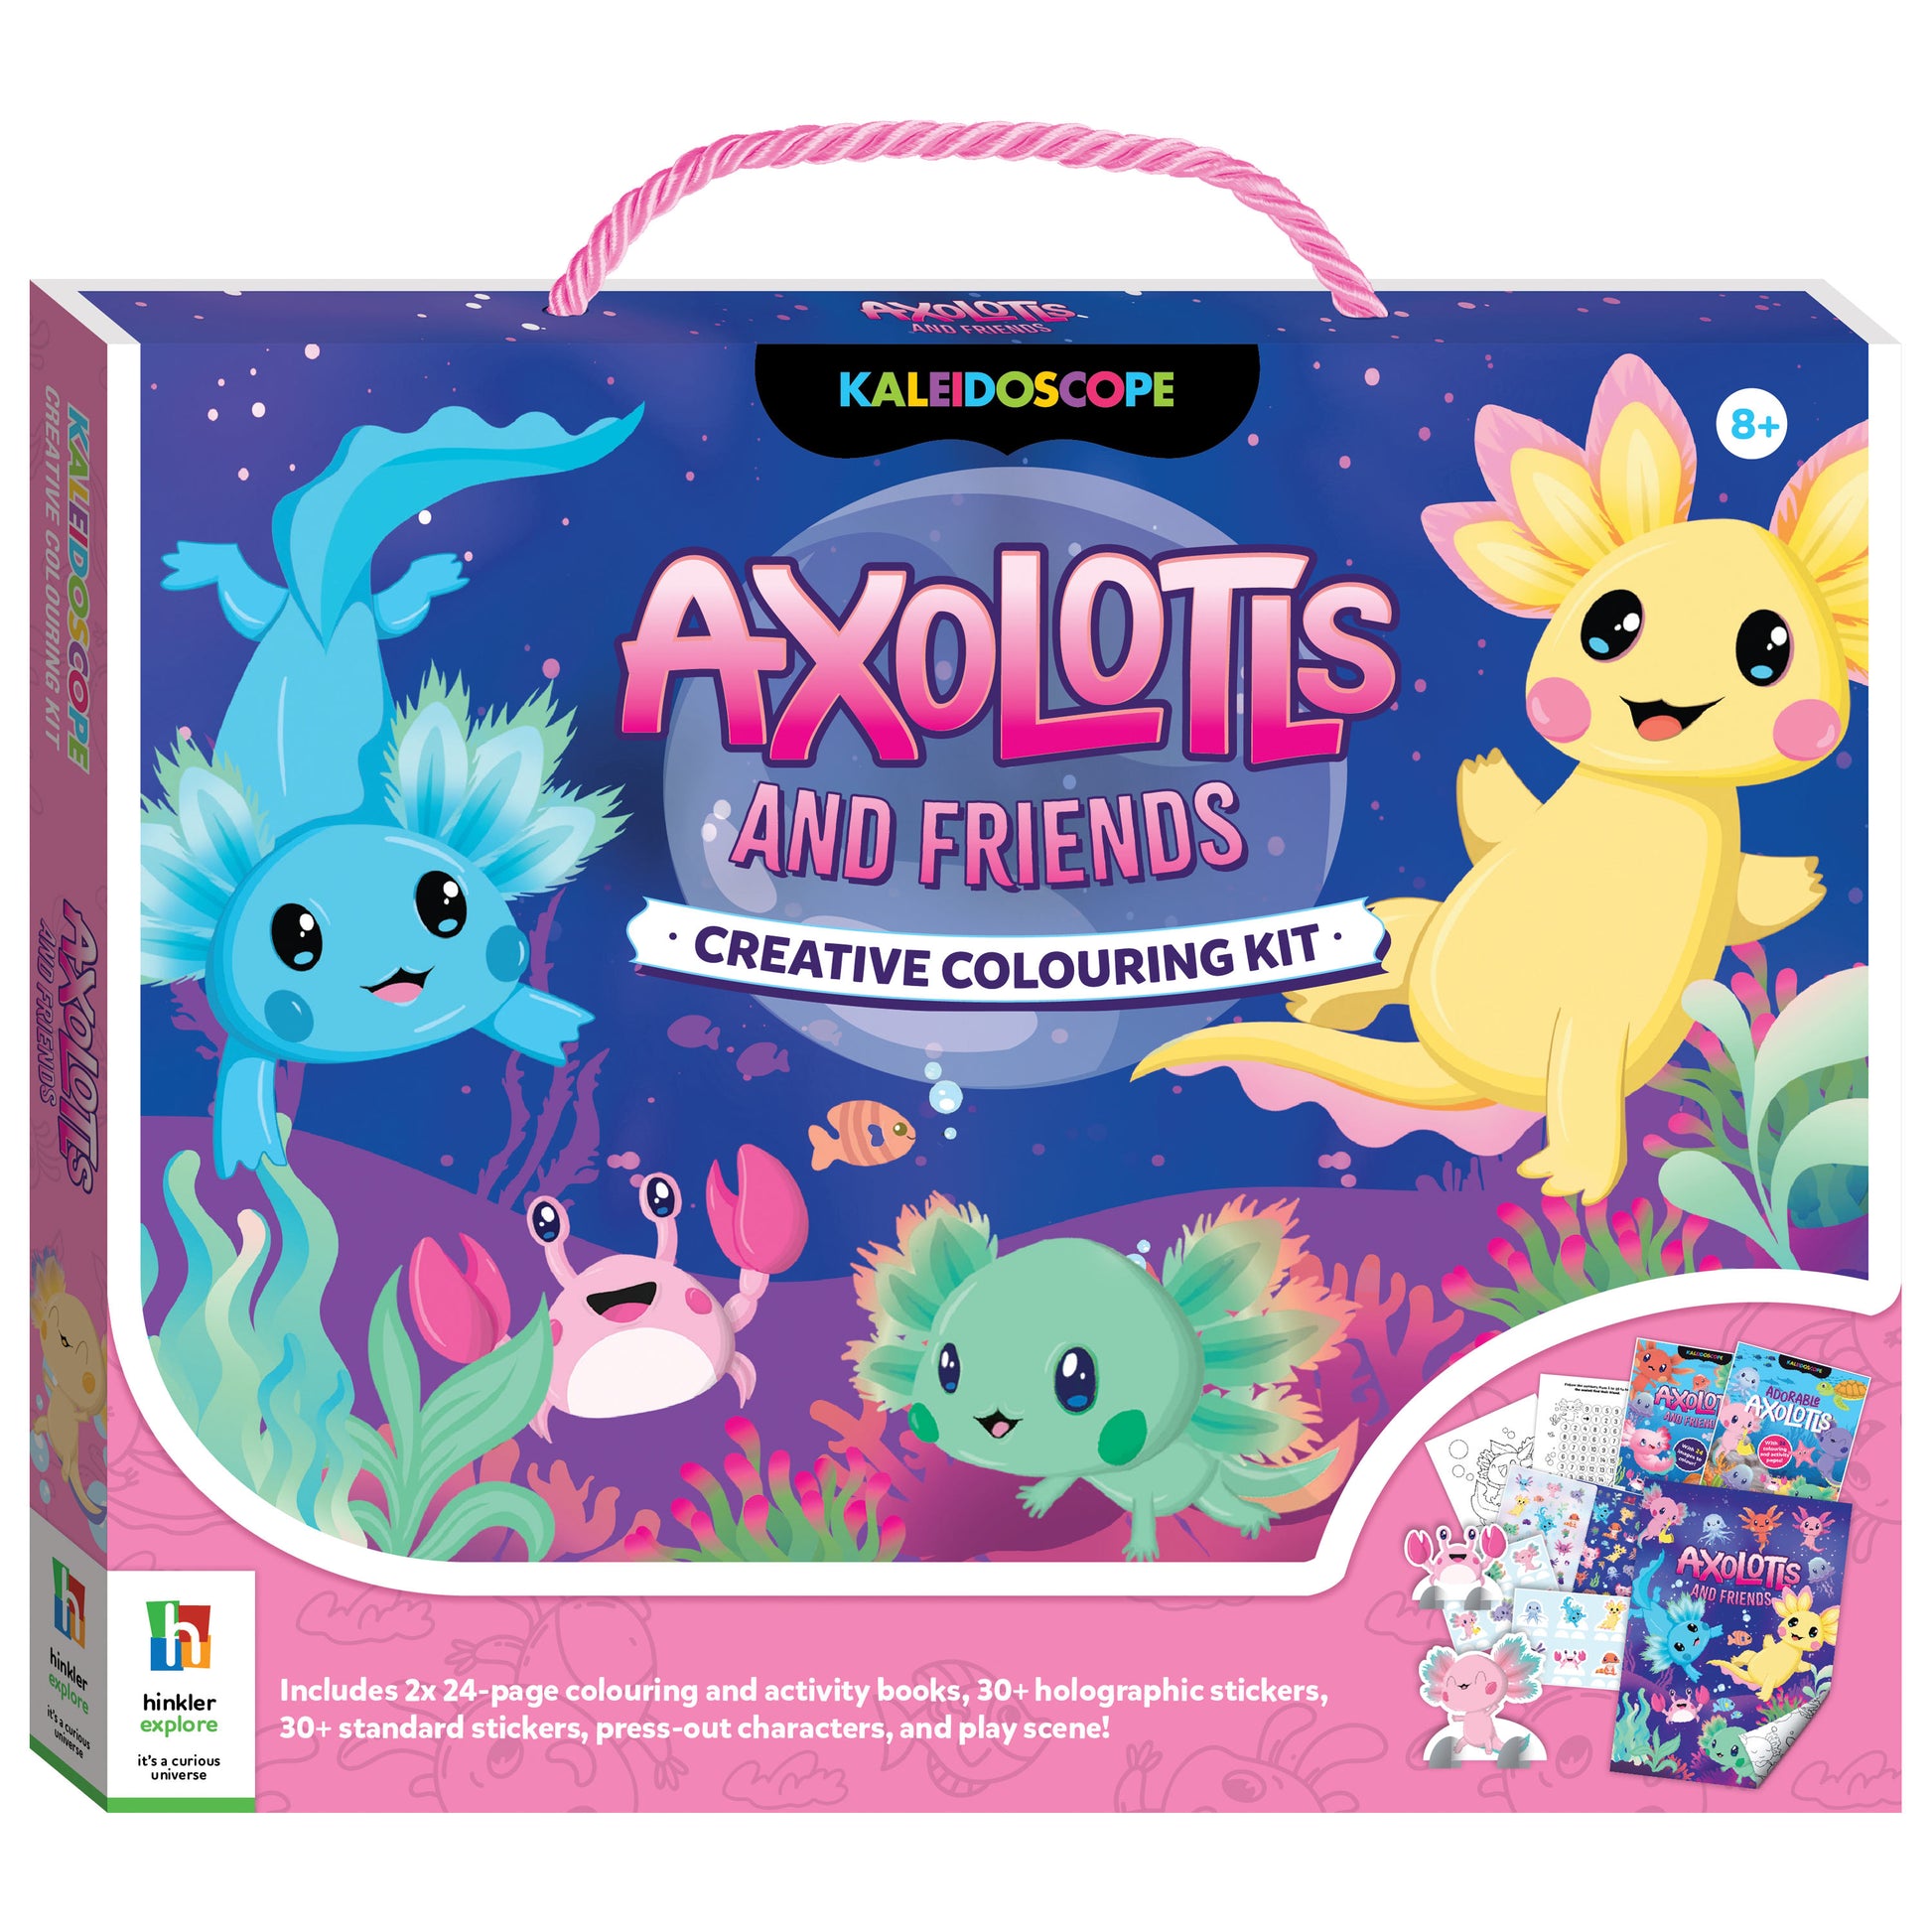 Axolotls and Friends Creative Colouring Kit